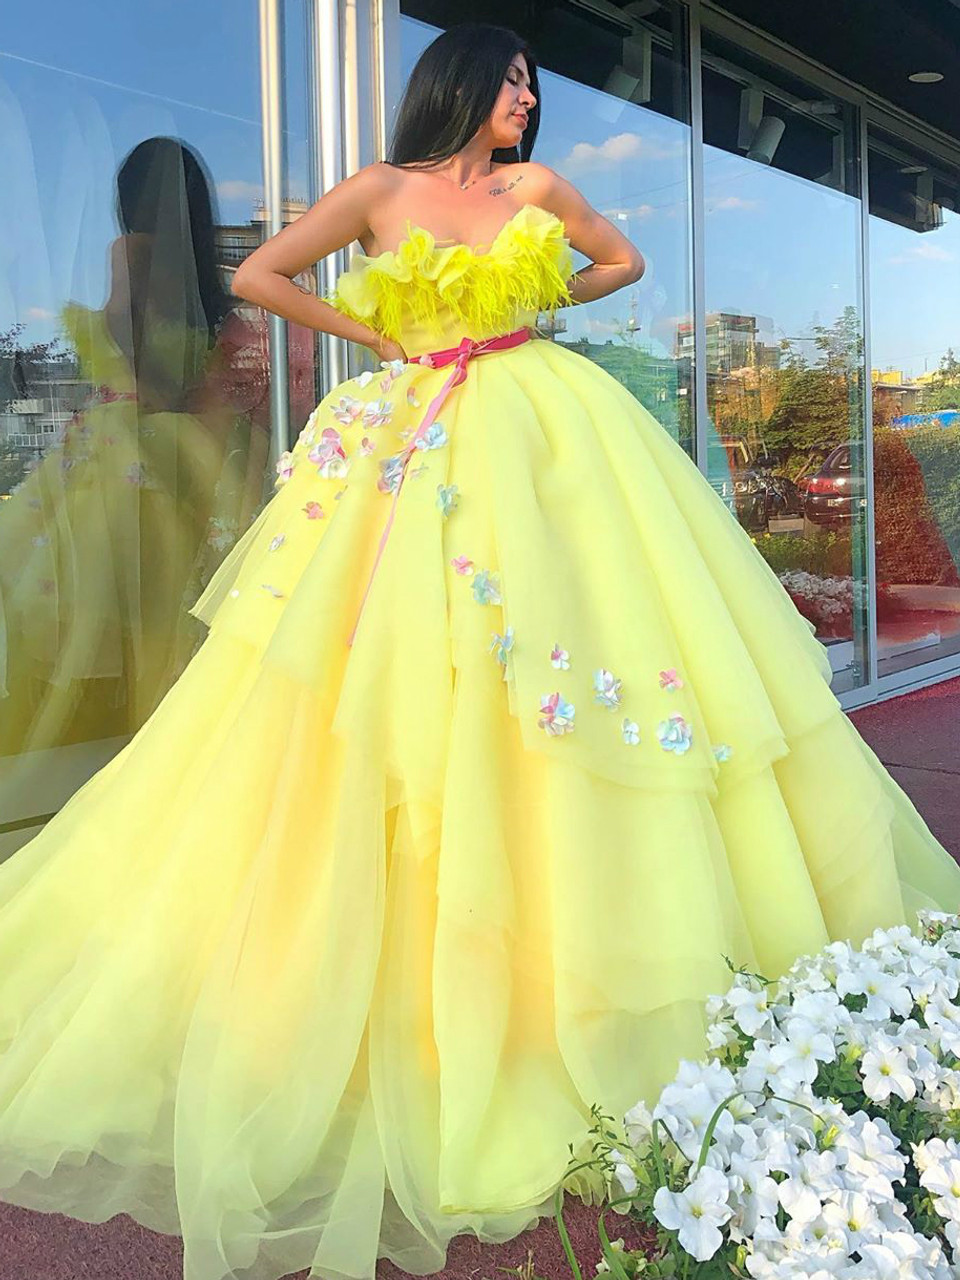 Yellow Organza Ruffles Ball Gown For Teens Prom Dresses.PD00251 –  AlineBridal